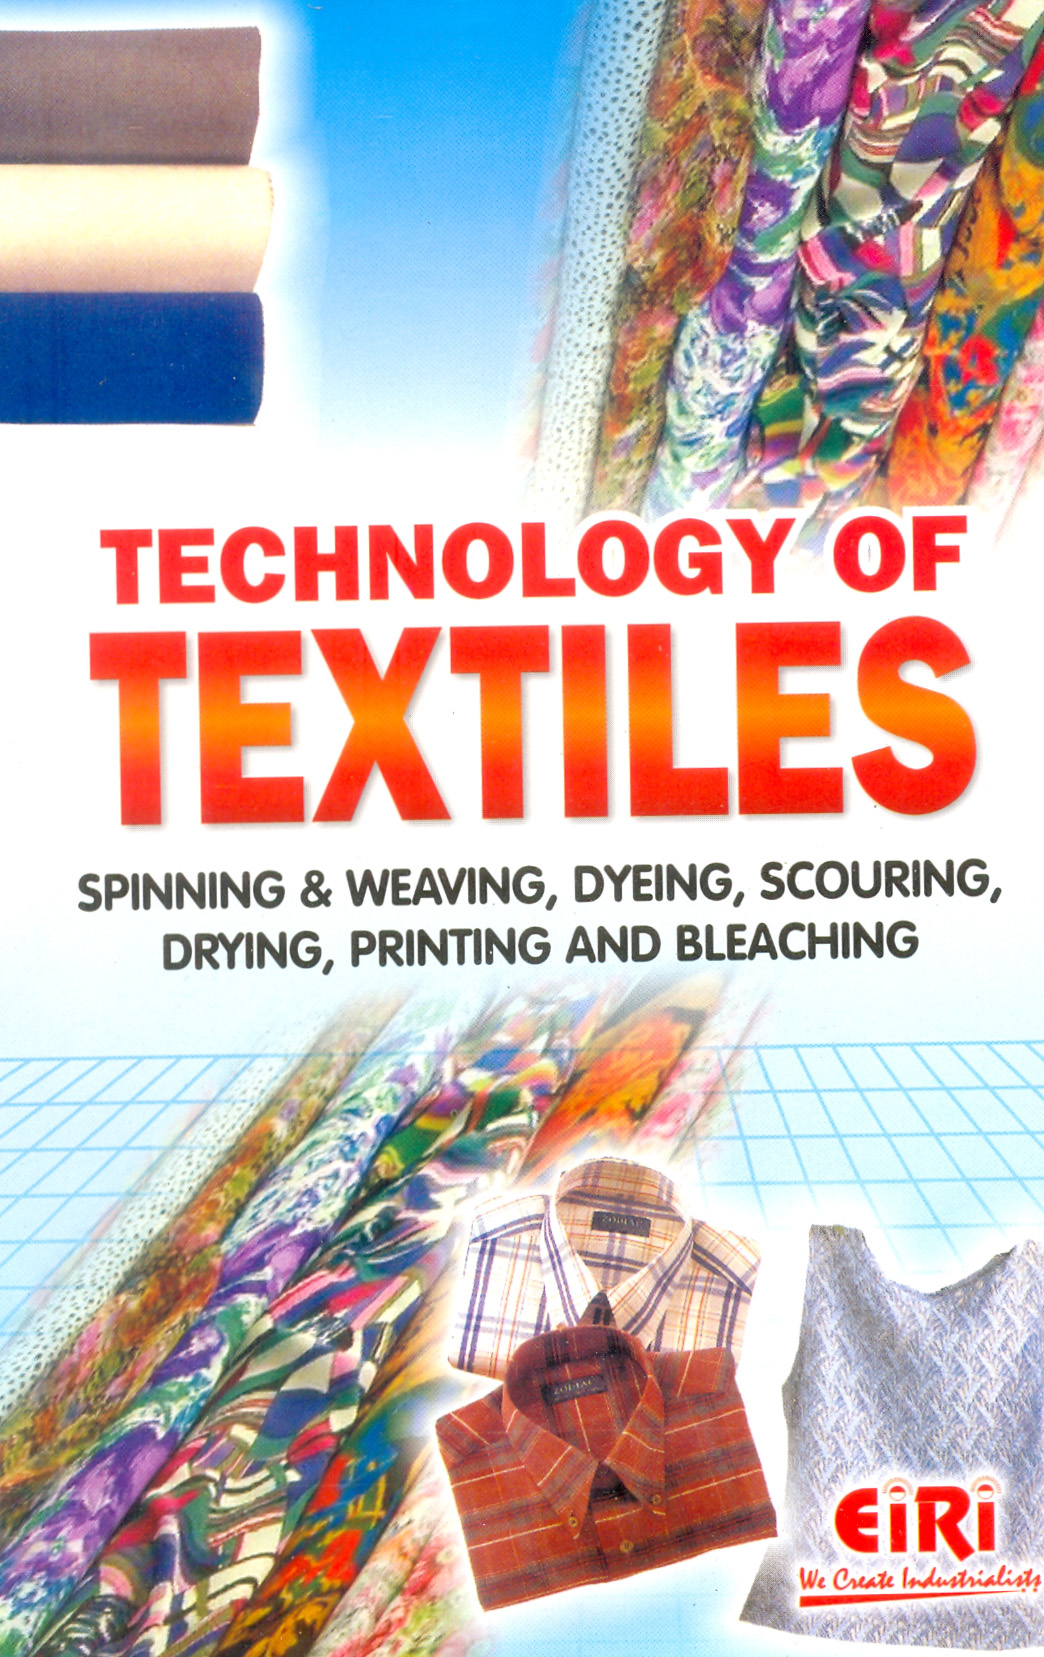 technology of textiles spinning & weaving, dyeing, scouring, drying, printing and bleaching (hand book)